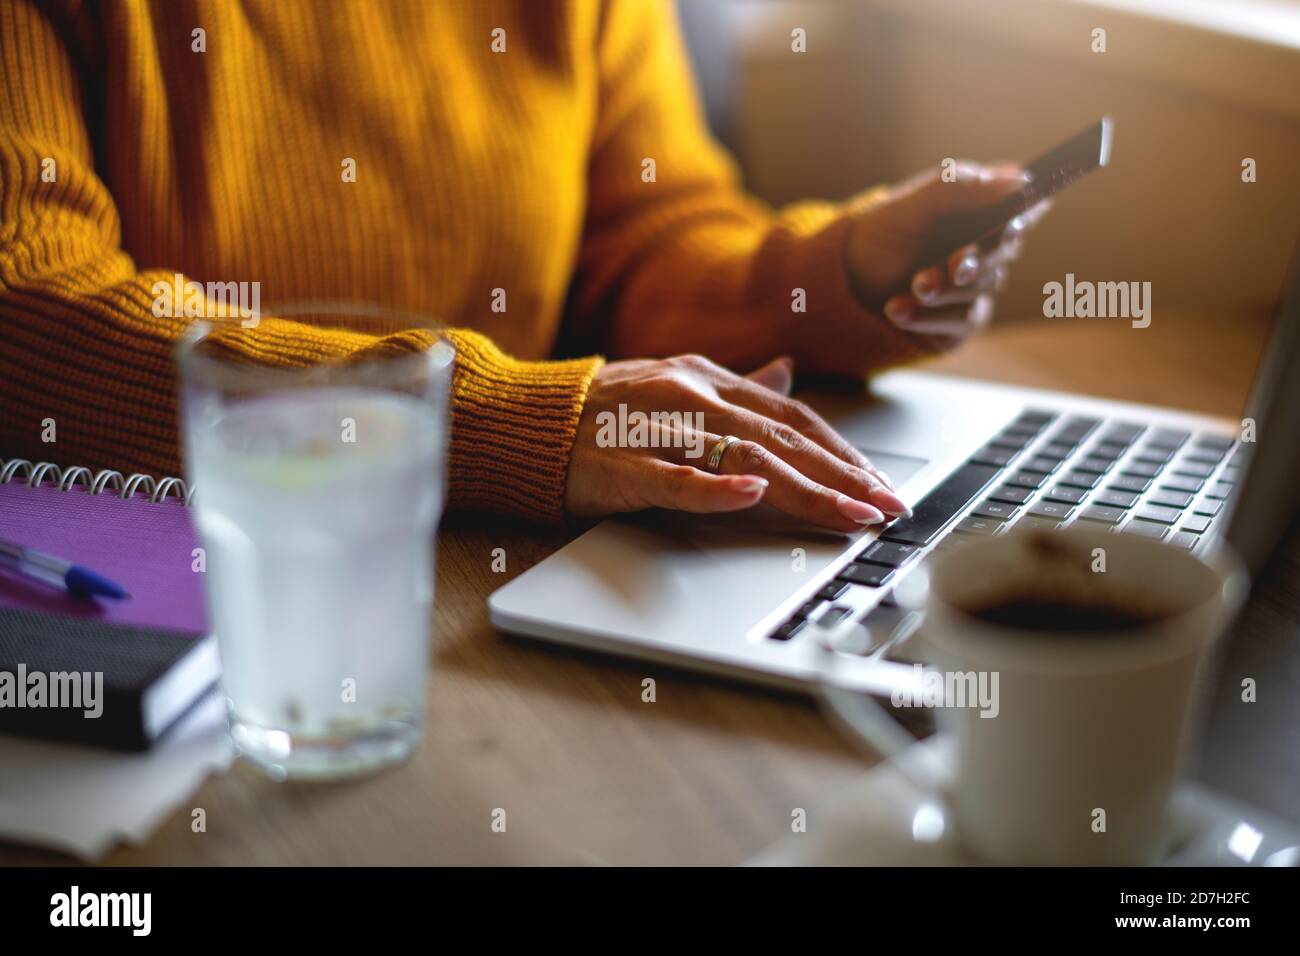 Unrecognizable person's hand holding credit card in front of lap top at home Stock Photo